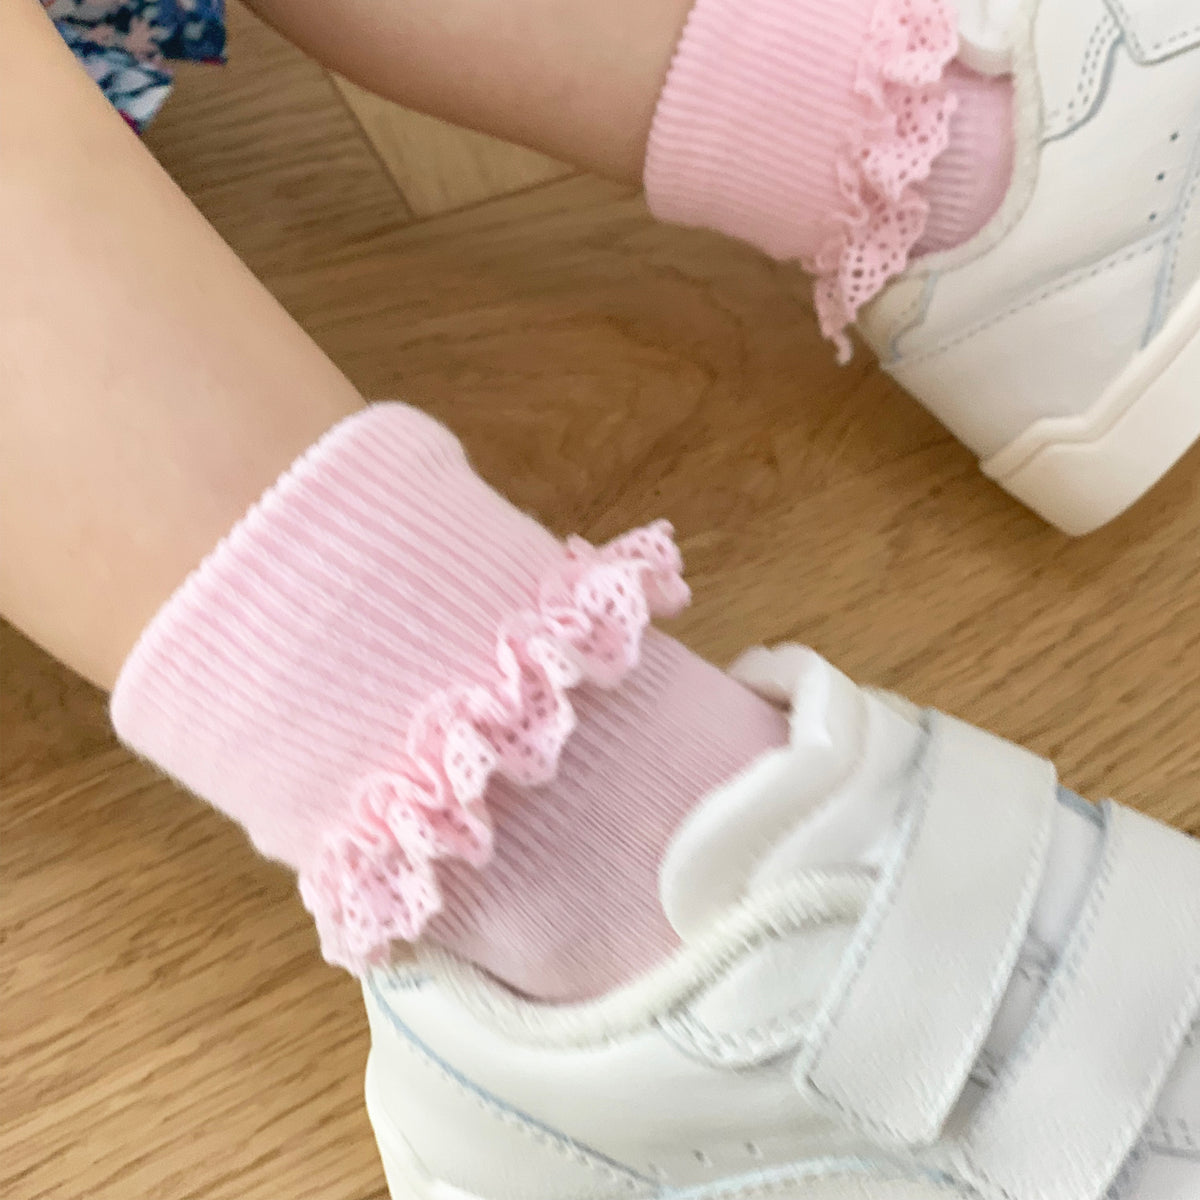 Frilly Non-Slip Stay-on Baby and Toddler Socks - 5 Pack in Amethyst, White and Pink Lemonade